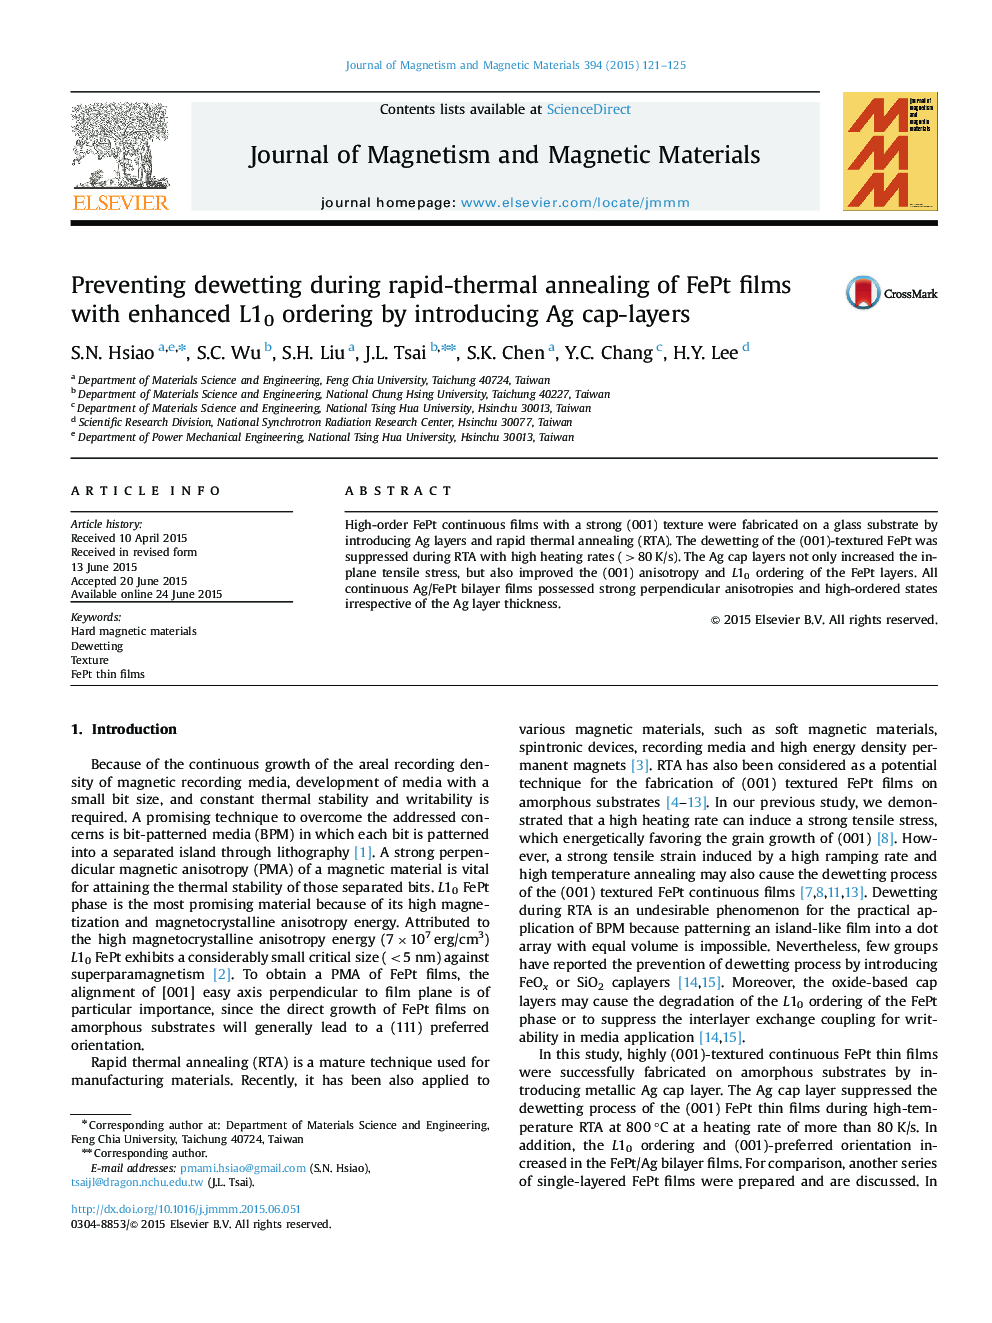 Preventing dewetting during rapid-thermal annealing of FePt films with enhanced L10 ordering by introducing Ag cap-layers